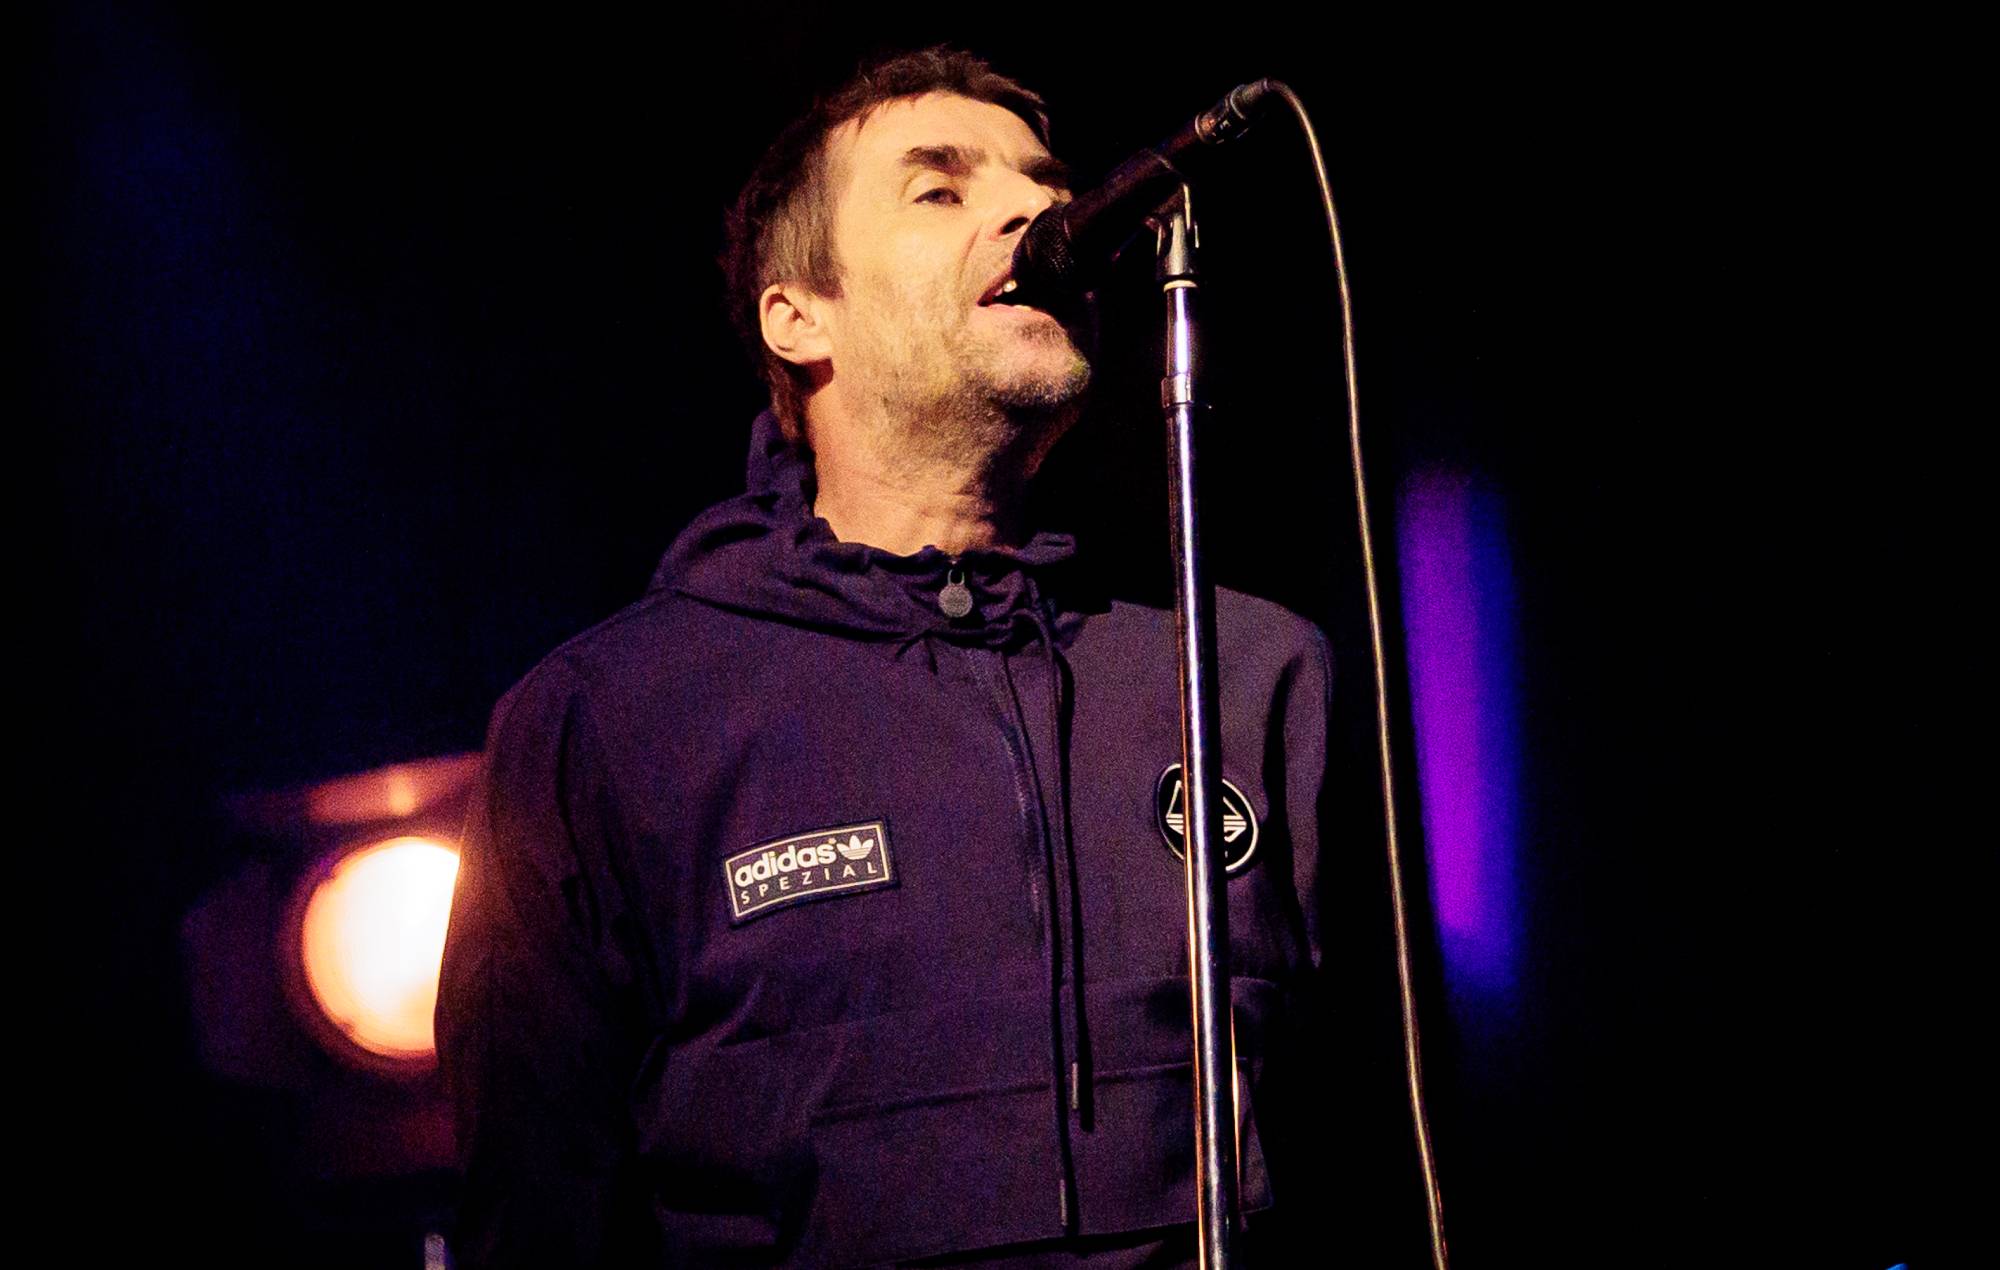 Liam Gallagher jokes that he’ll play Lidl if Manchester Co-Op Live isn’t “sorted” for ‘Definitely Maybe’ dates